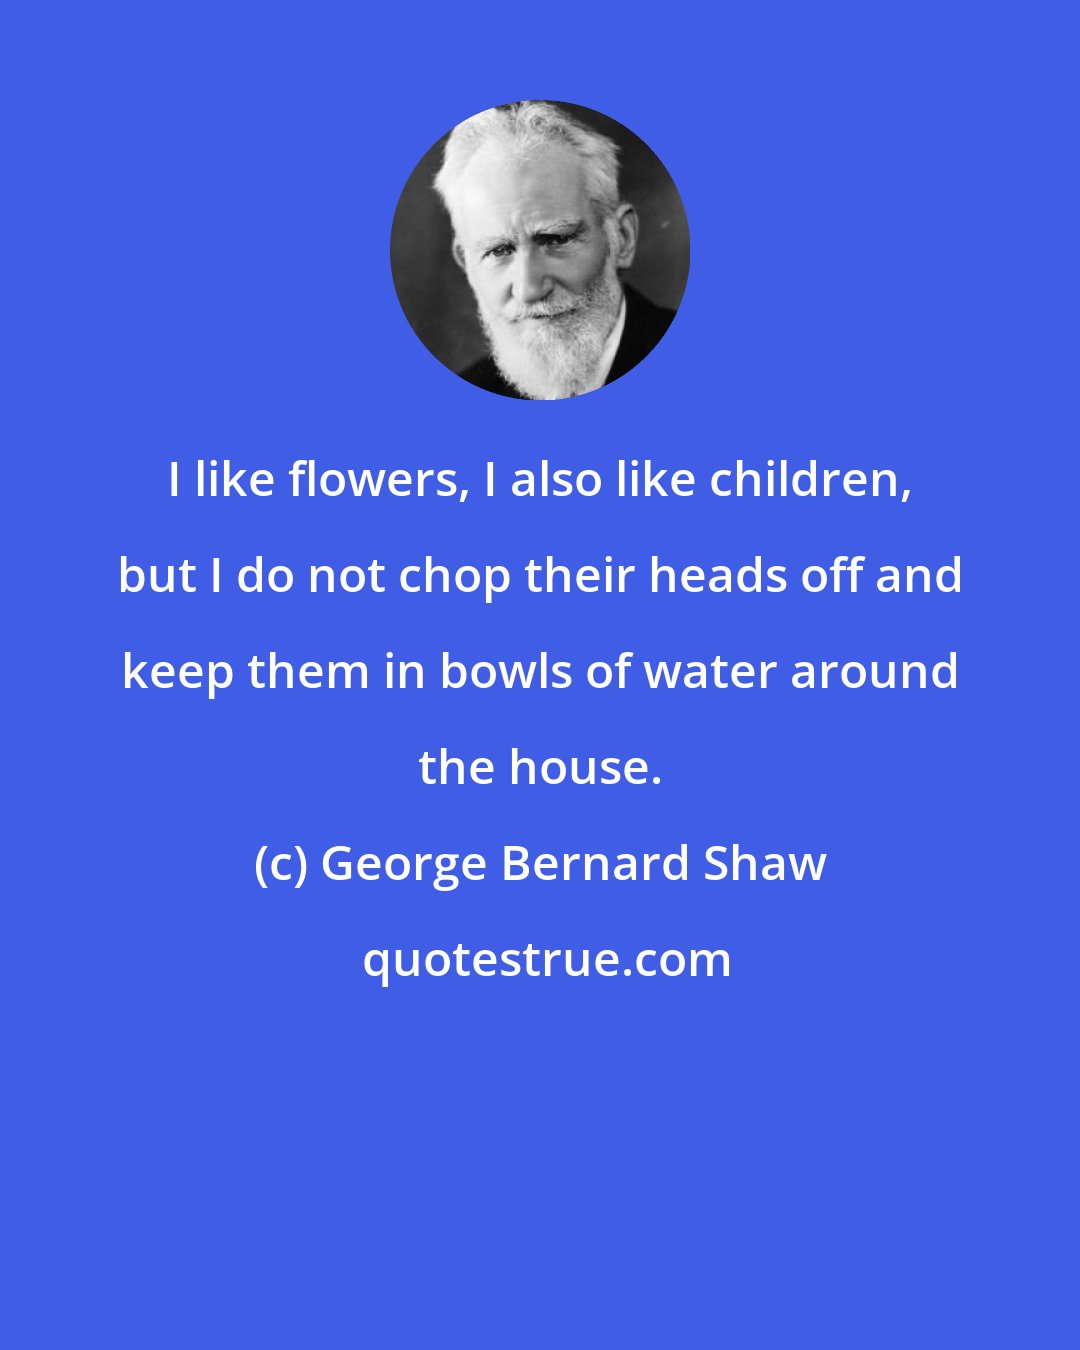 George Bernard Shaw: I like flowers, I also like children, but I do not chop their heads off and keep them in bowls of water around the house.